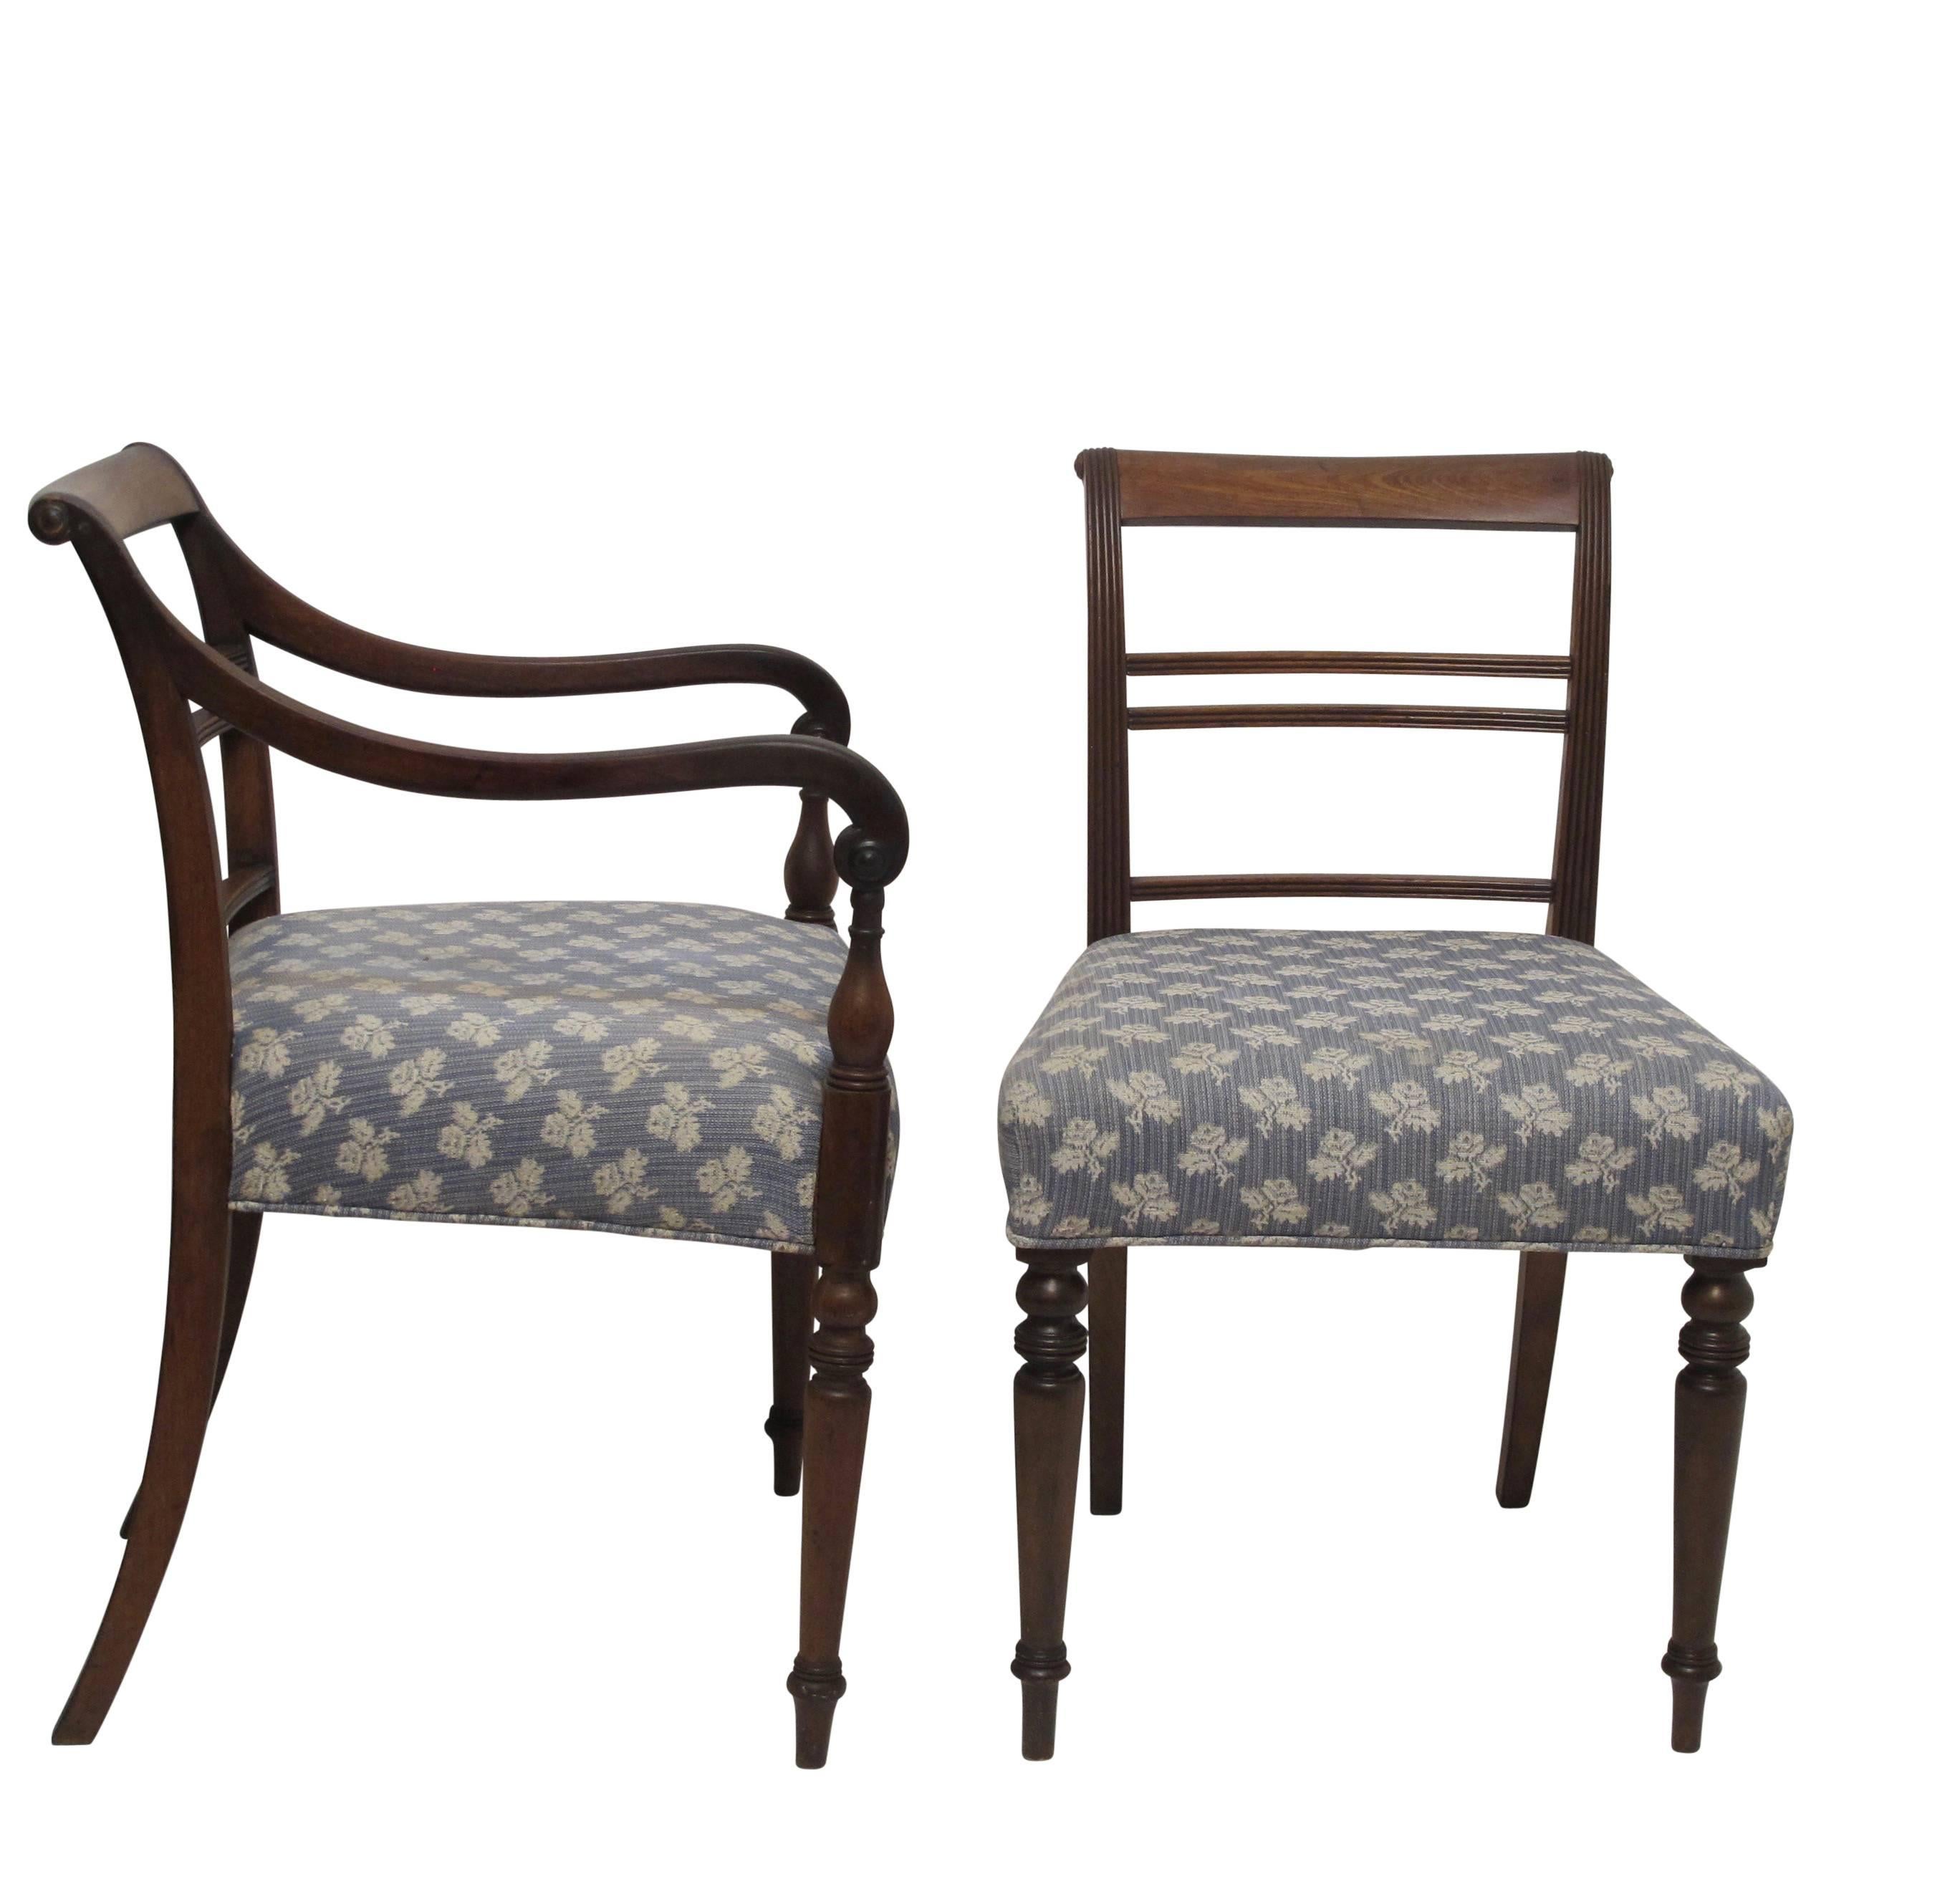 A set of eight Regency period dining chairs, two armchairs and six side chairs. Original solid walnut chairs with reeded backs and arms on turned legs. Ready for new upholstery. England, circa 1840.
Armchairs measure 33.5 inches high x 21.75 wide x